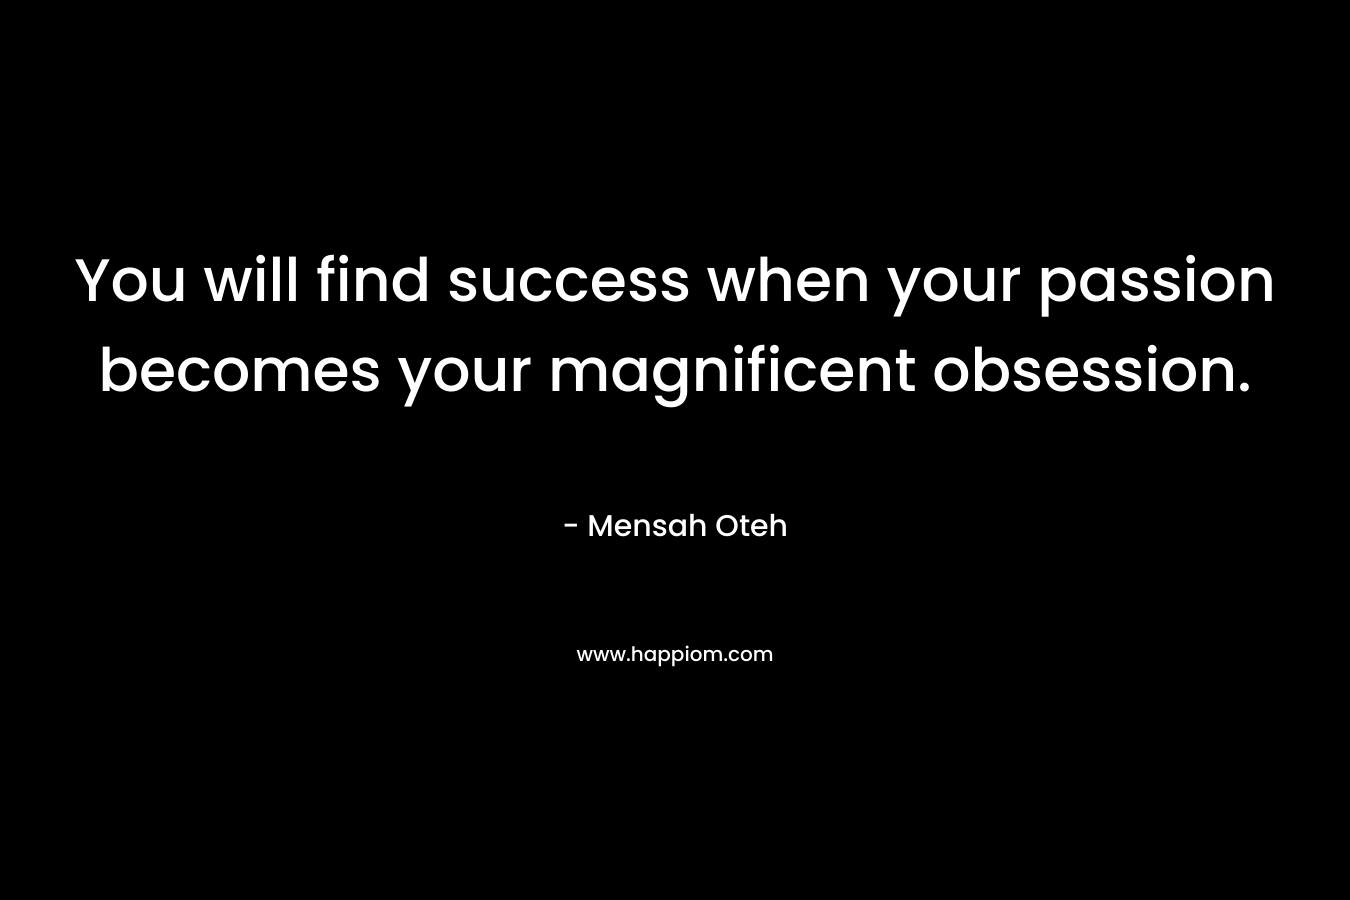 You will find success when your passion becomes your magnificent obsession.